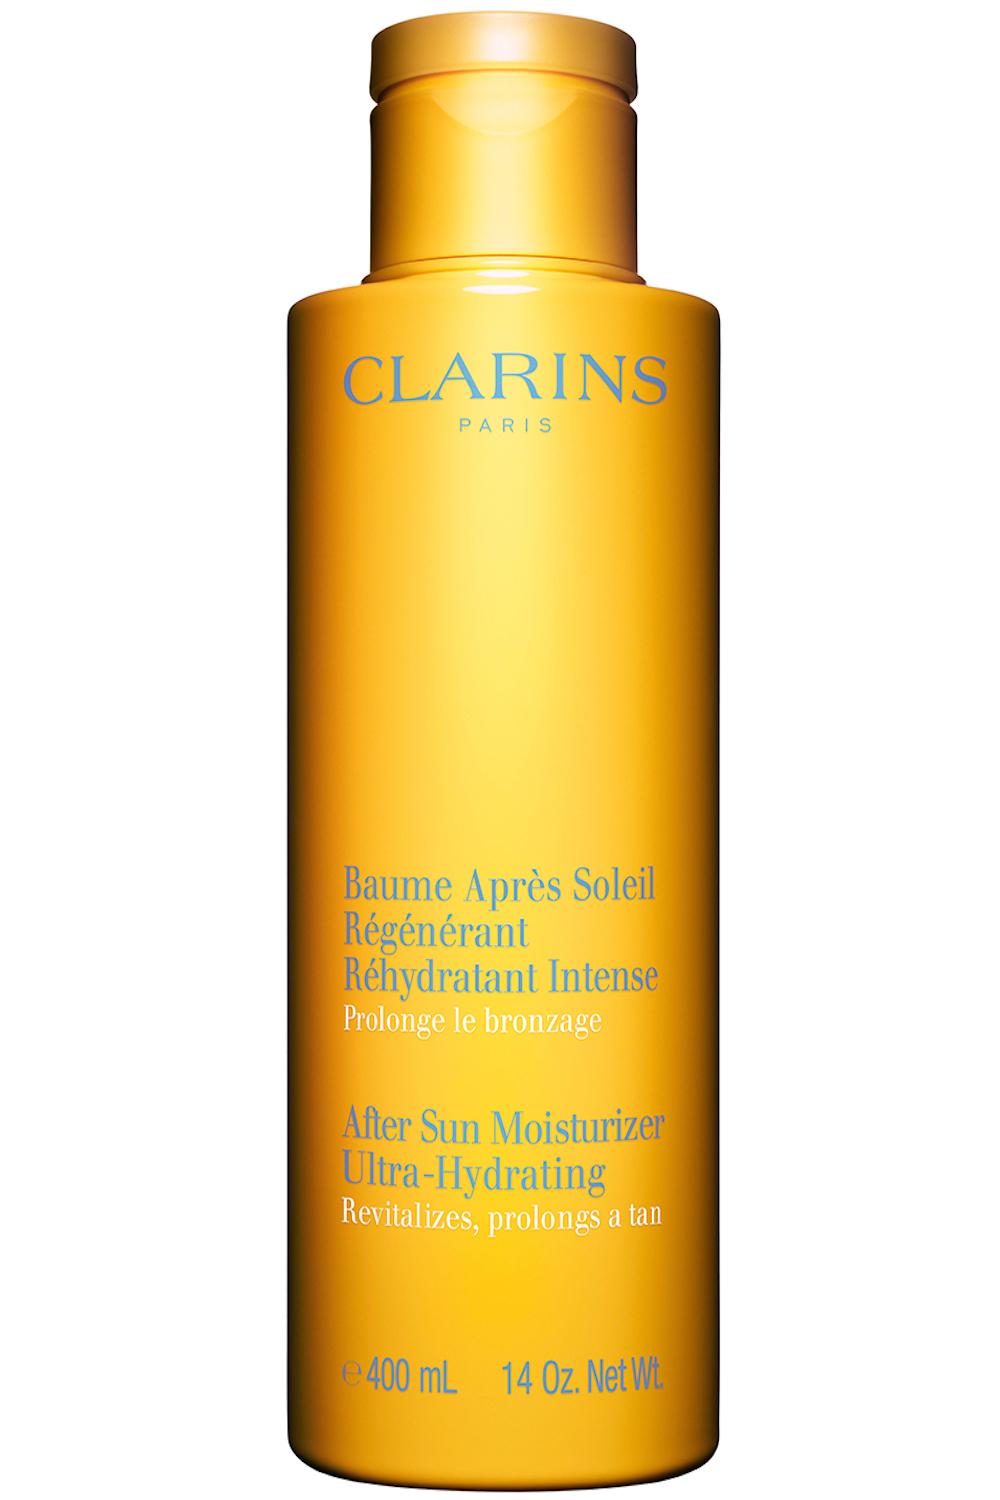 Aftersun - Clarins - 33,85 €